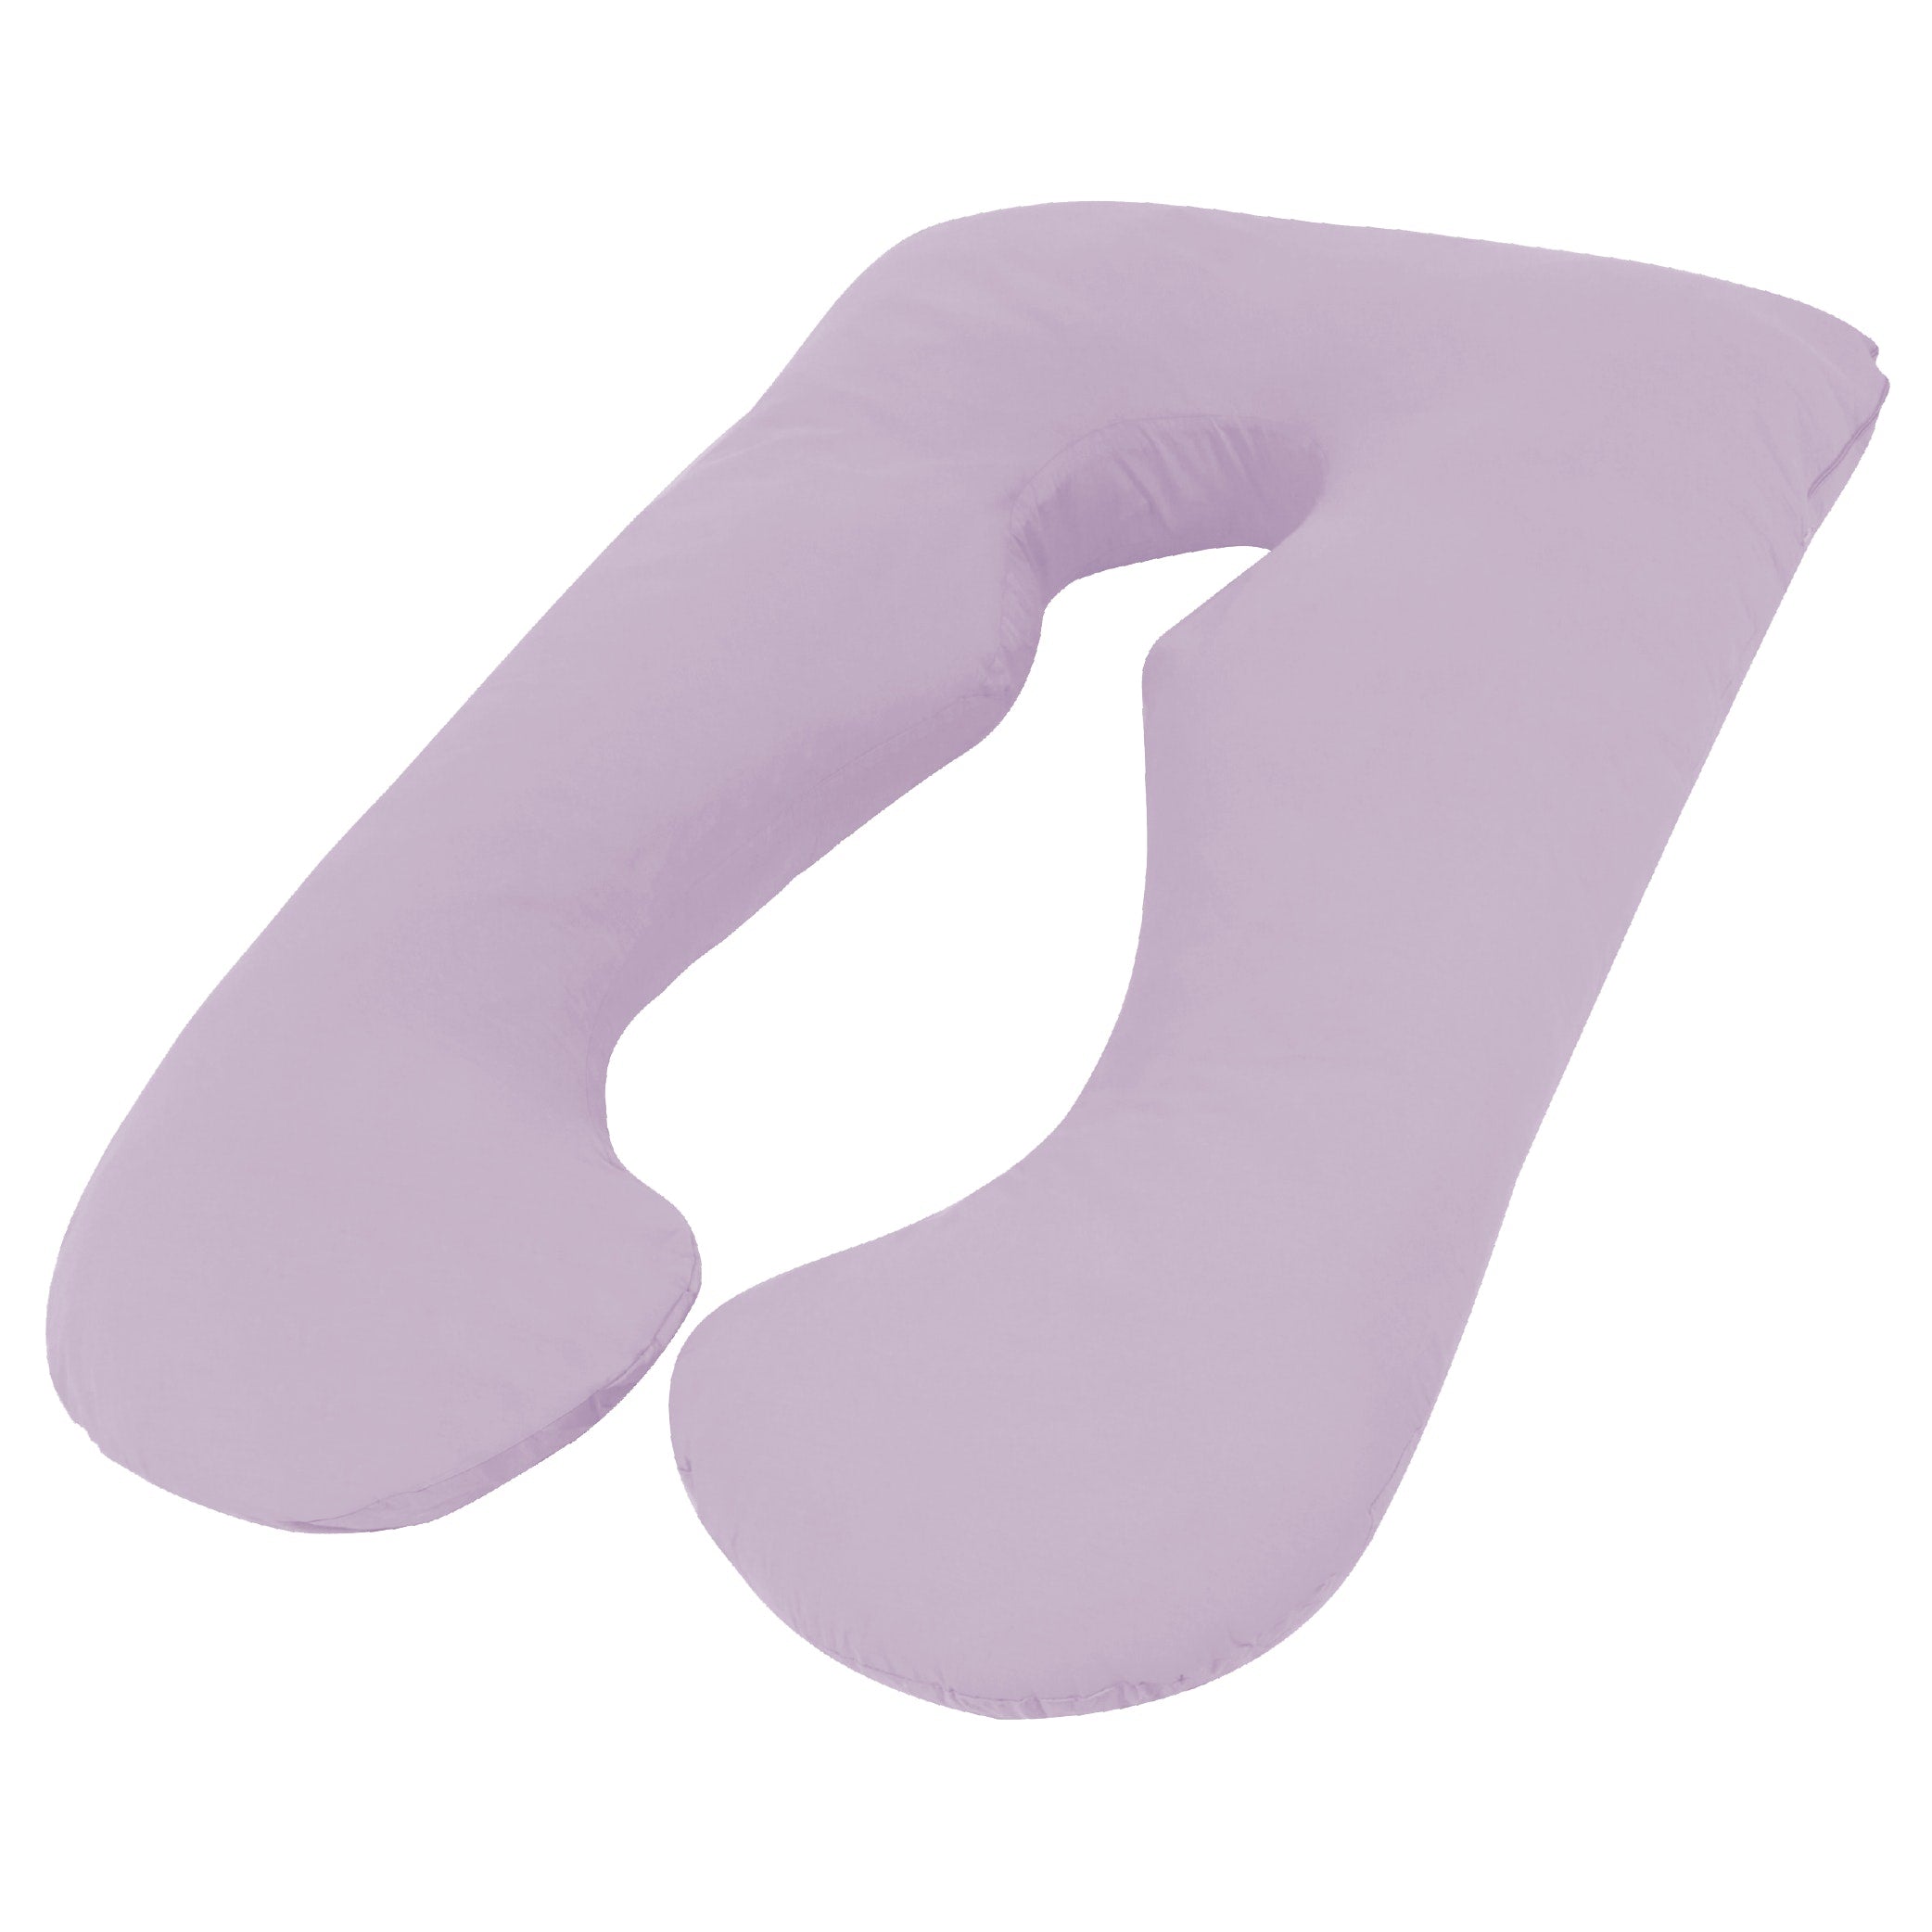 Aus Made Maternity Pregnancy Nursing Sleeping Body Pillow Pillowcase Included Lilac